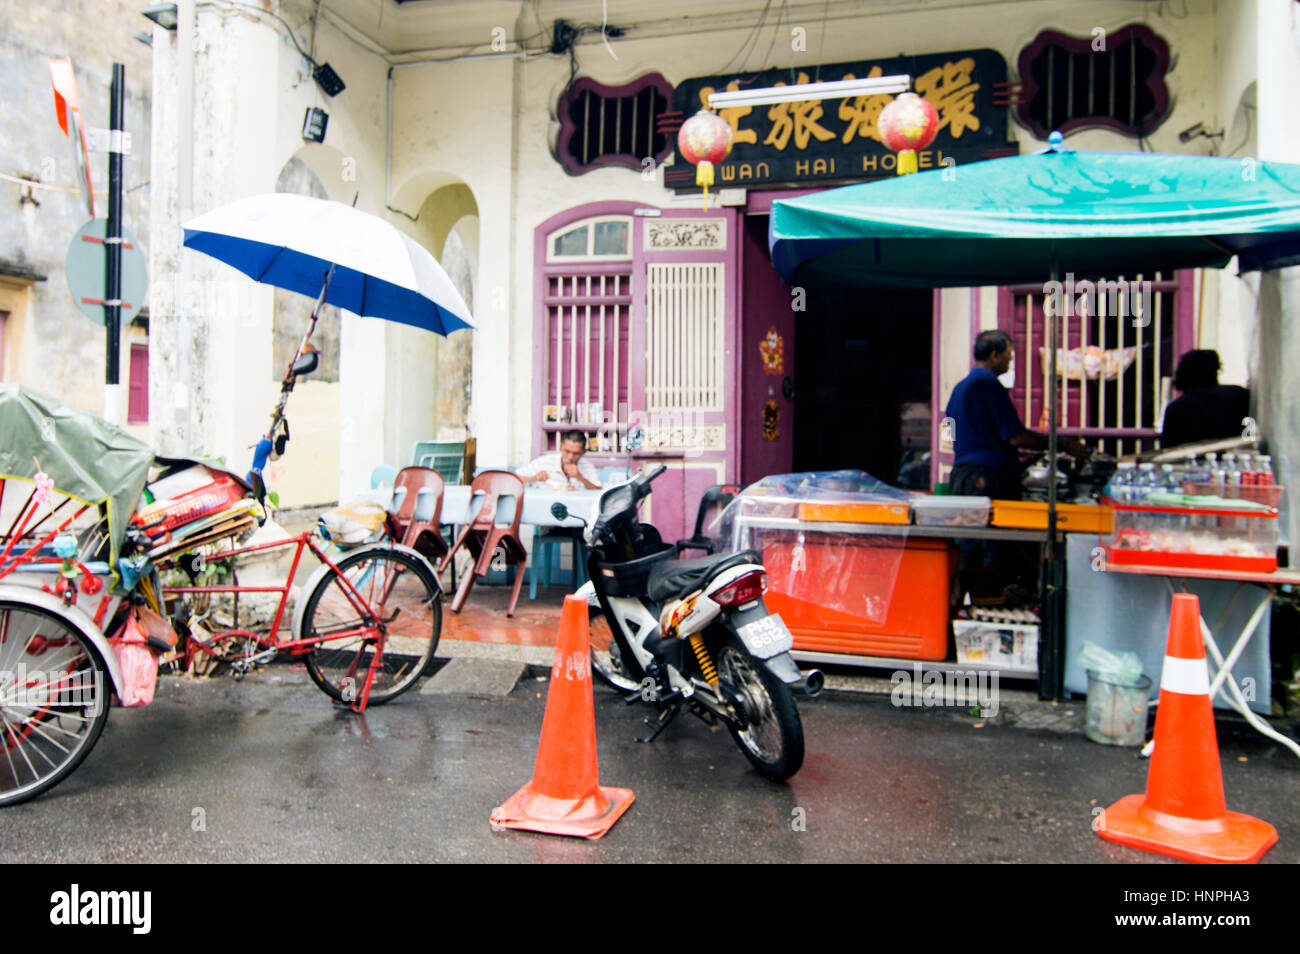 Guest house scene, Love Lane, Georgetown, Penang, Malaysia Stock Photo